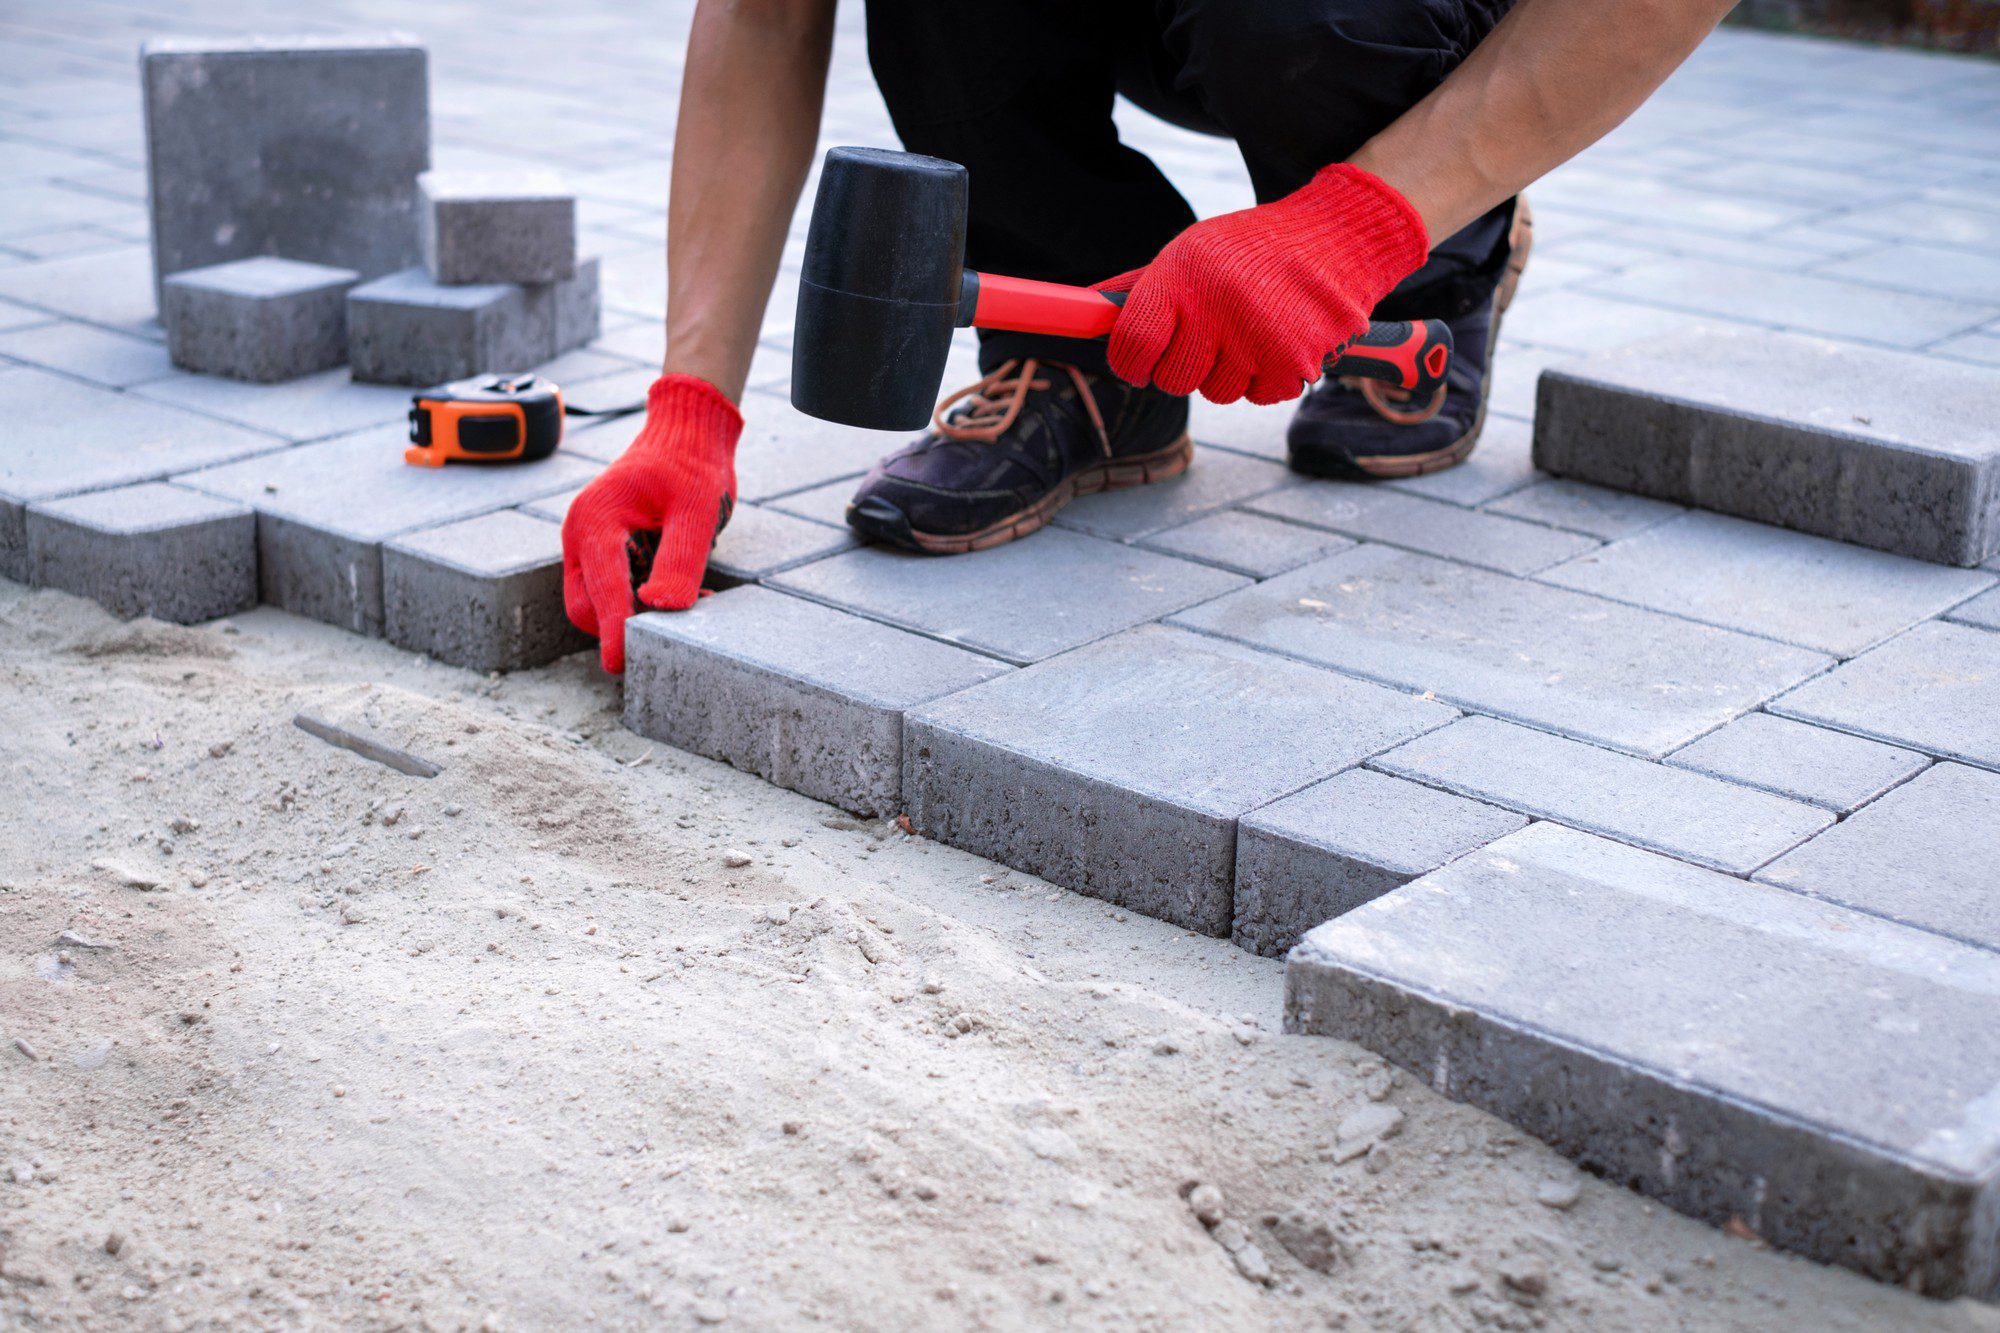 The image shows a person in the process of laying paving stones for a patio or walkway. The individual is positioned close to the ground, wearing work pants and shoes, and has protective red gloves on. They are using a rubber mallet, a common tool for this type of work, to ensure the paving stones are set at the correct level and are securely in place. To the left of the person, there is a tape measure, suggesting precise measurements are being taken during the installation process. The stones are gray and are laid out in an interlocking pattern, a method often used to create a stable and attractive surface. It appears to be an outdoor setting, possibly a construction or landscaping site.